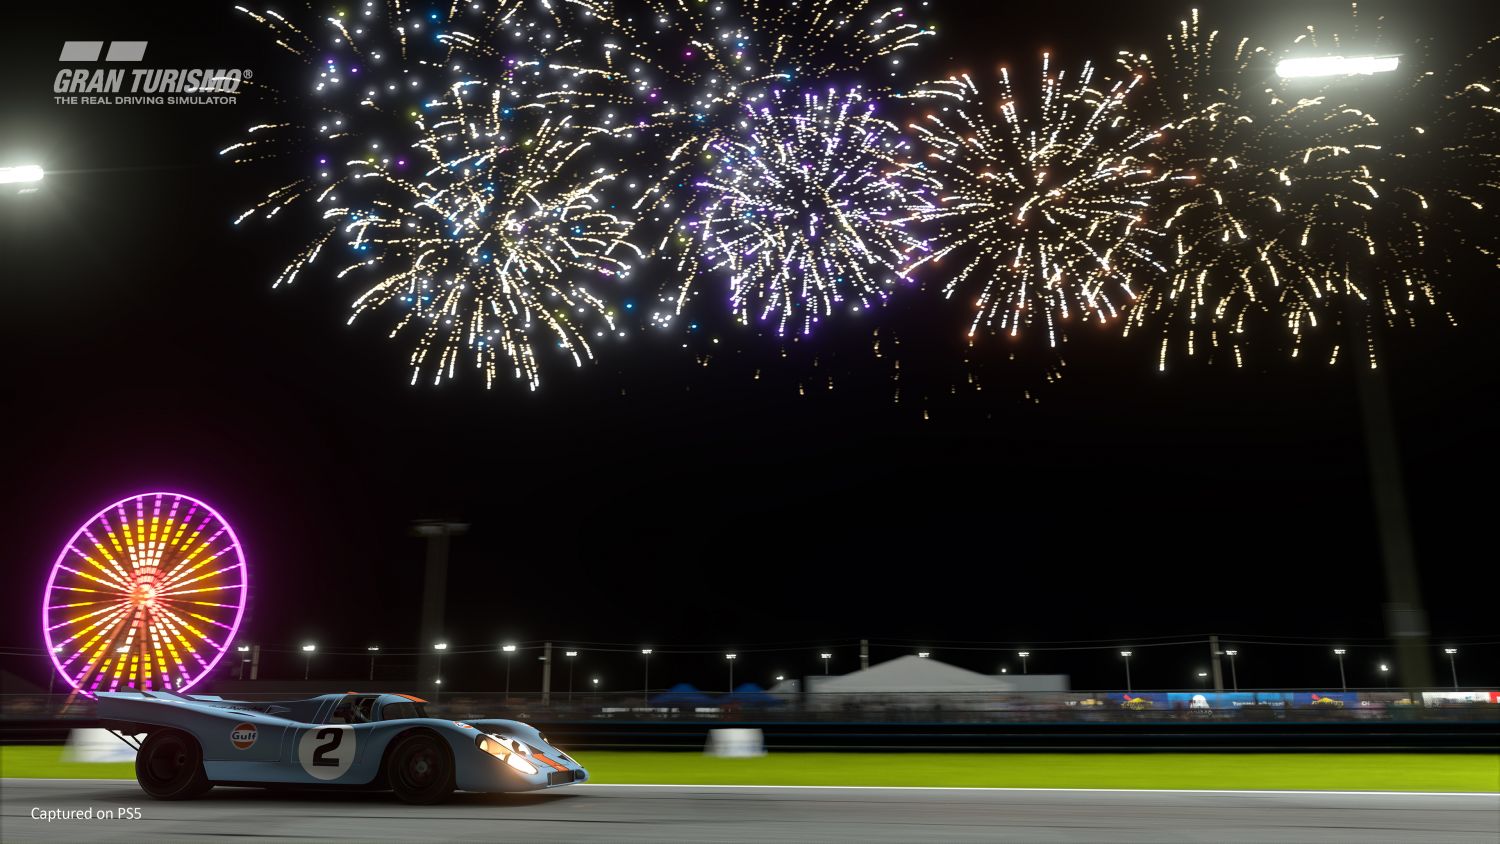 Geek Review: Gran Turismo 7 - Stunning both day and night